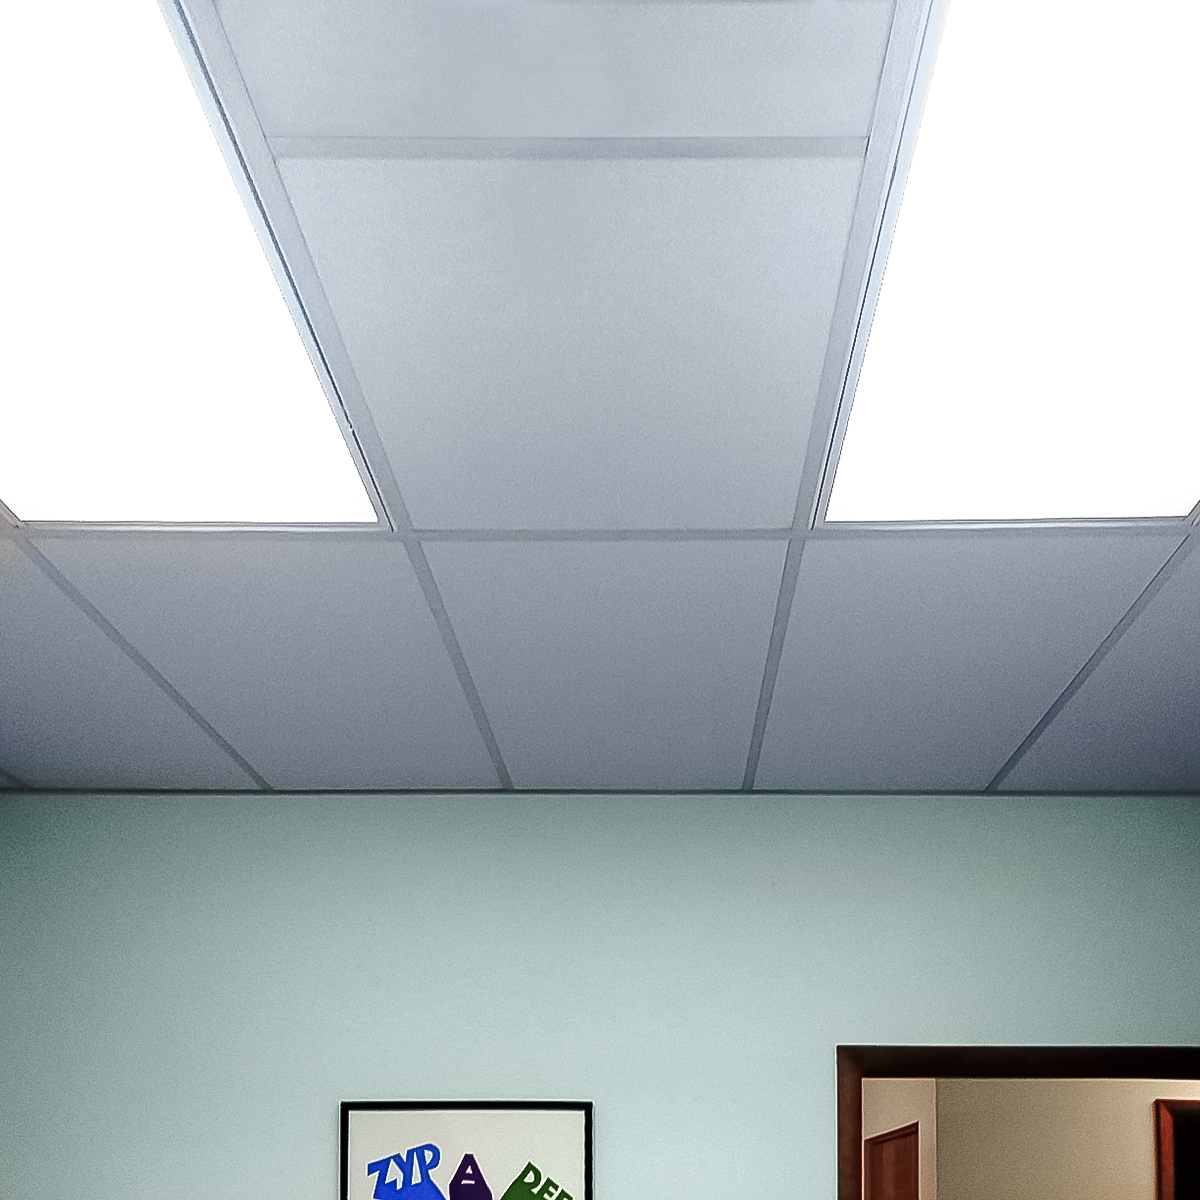 Permalink to 24×24 Acoustical Ceiling Tiles